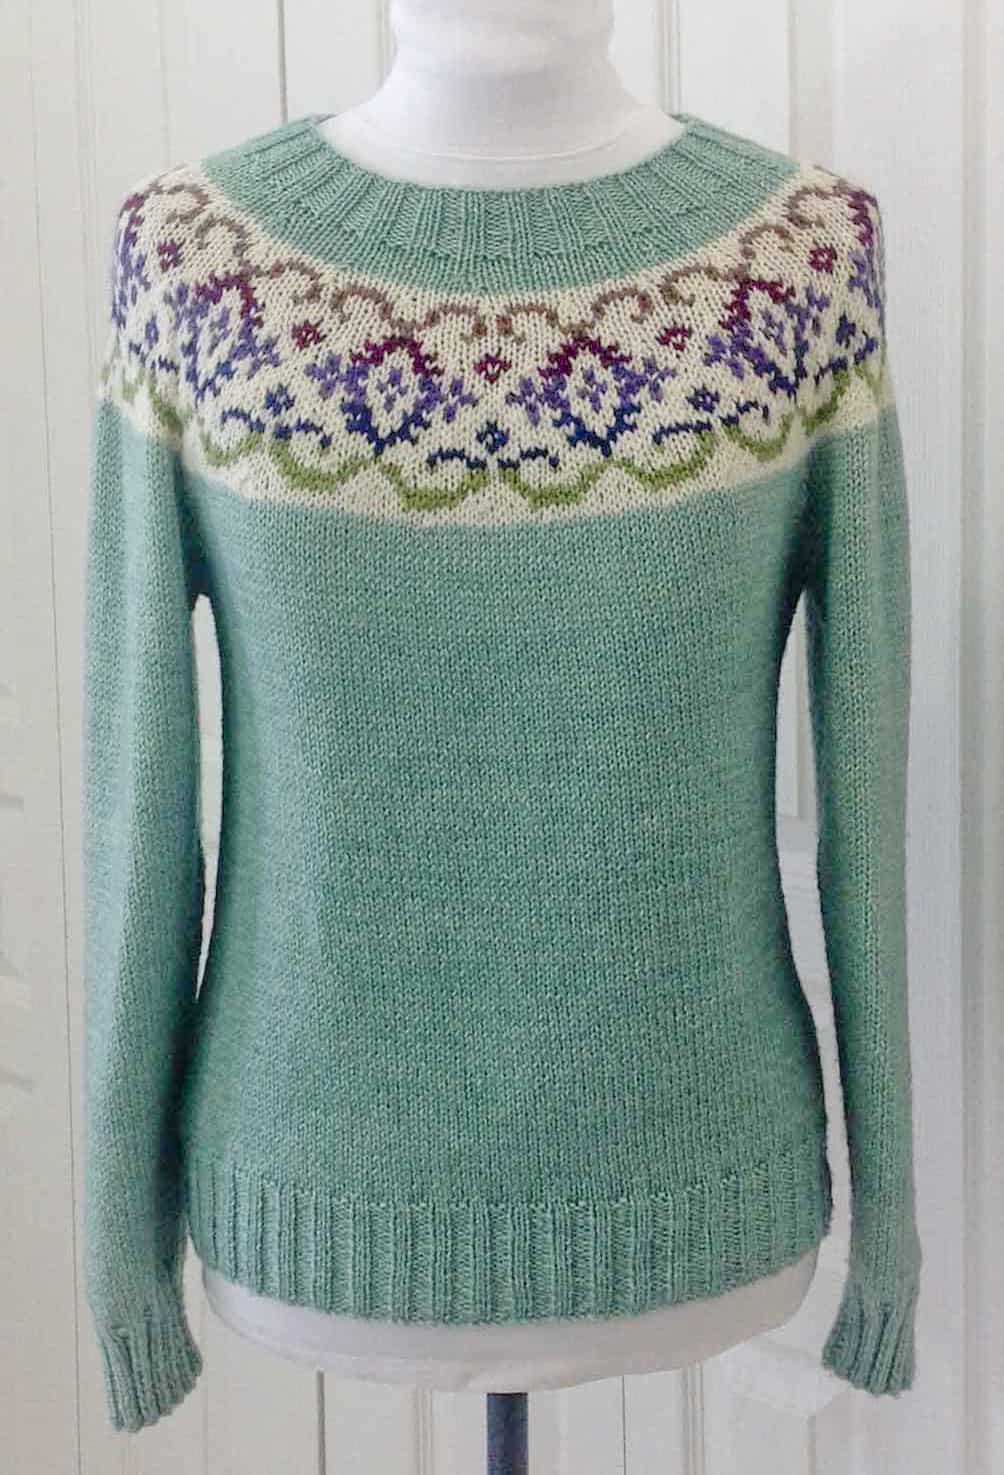 Fair Isle Knitting Projects Experienced Knitters Will Adore!